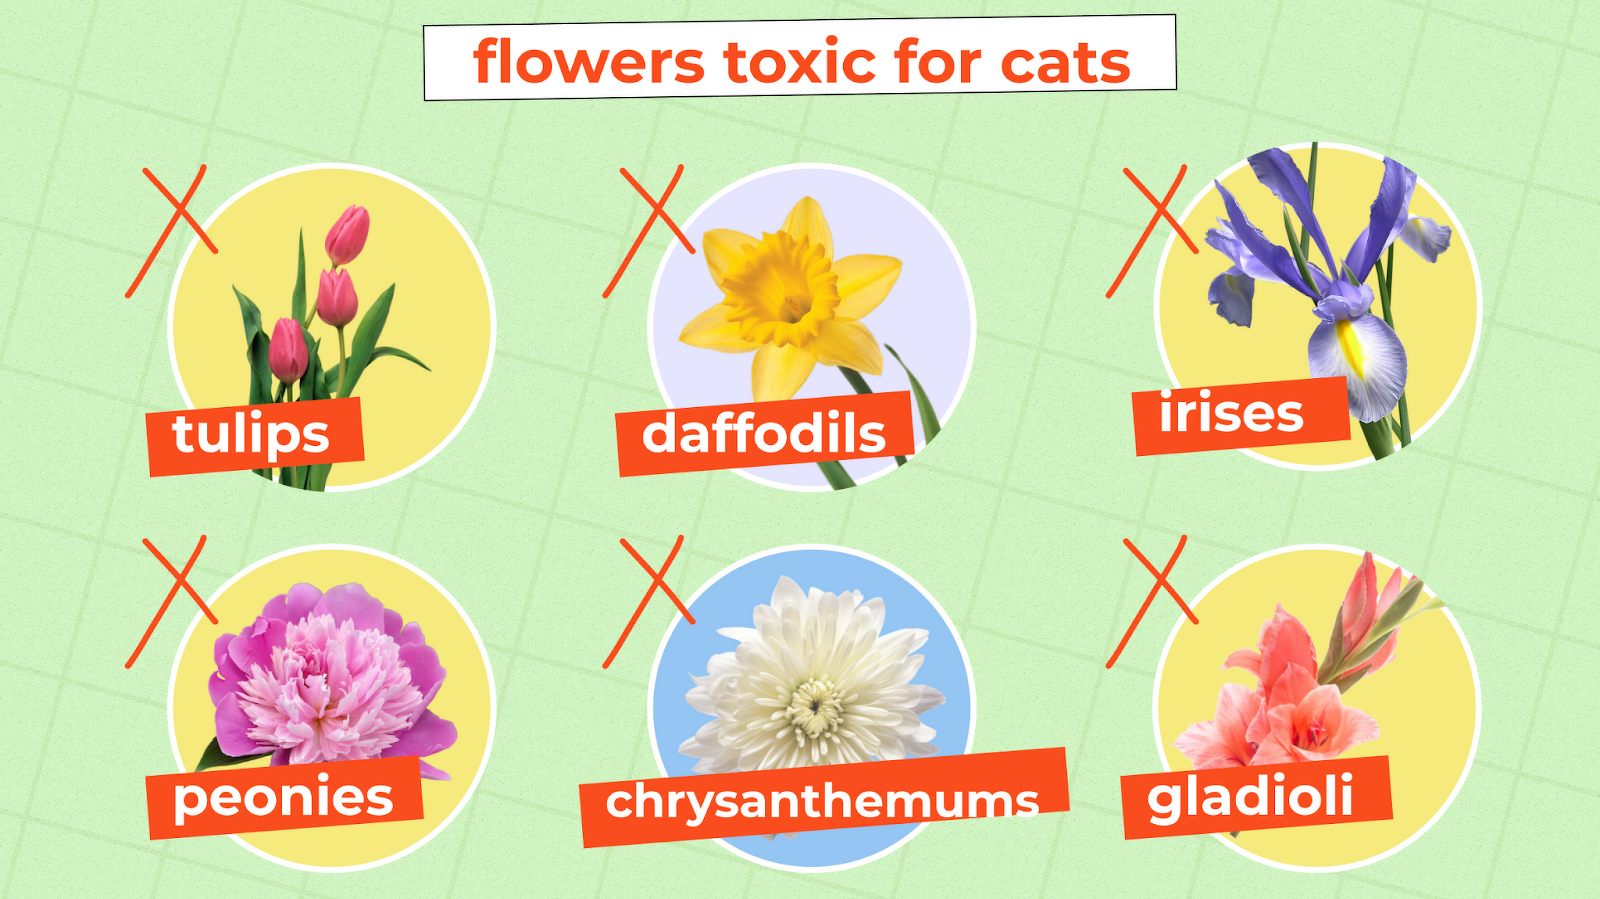 Common Flowers That Are Poisonous to Cats